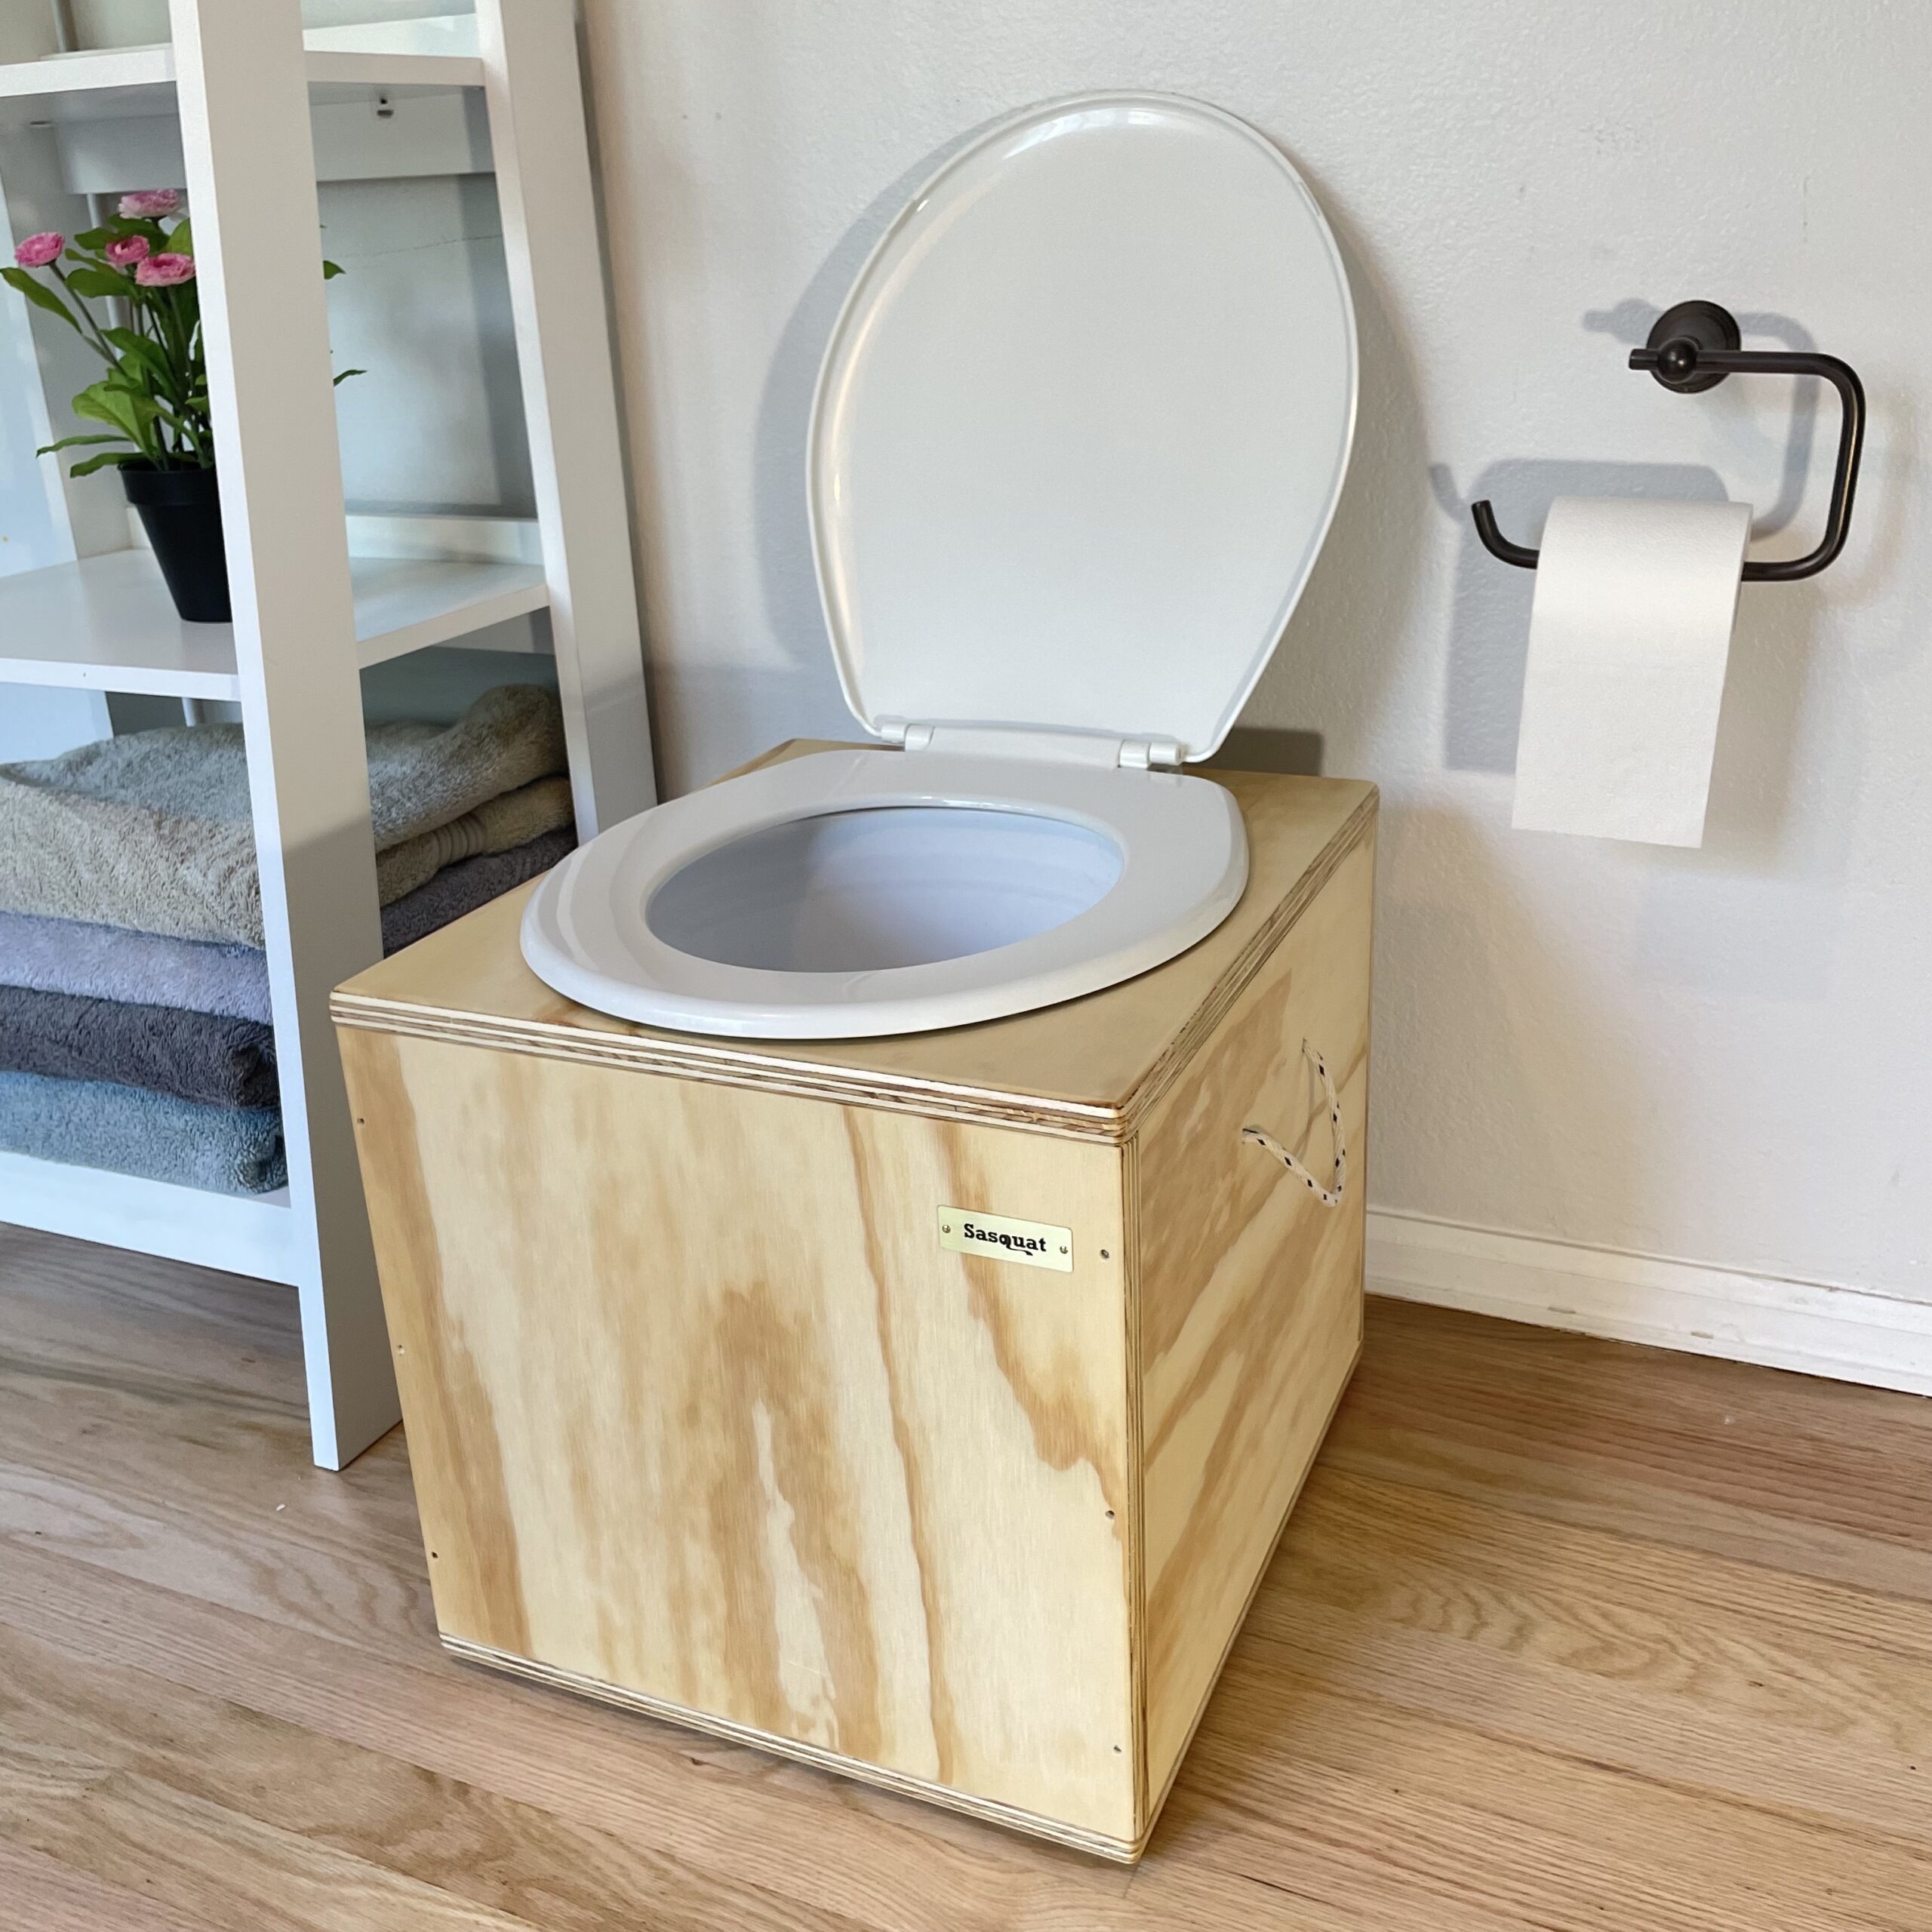 A compost toilet with a toilet set on top of a wooden box.